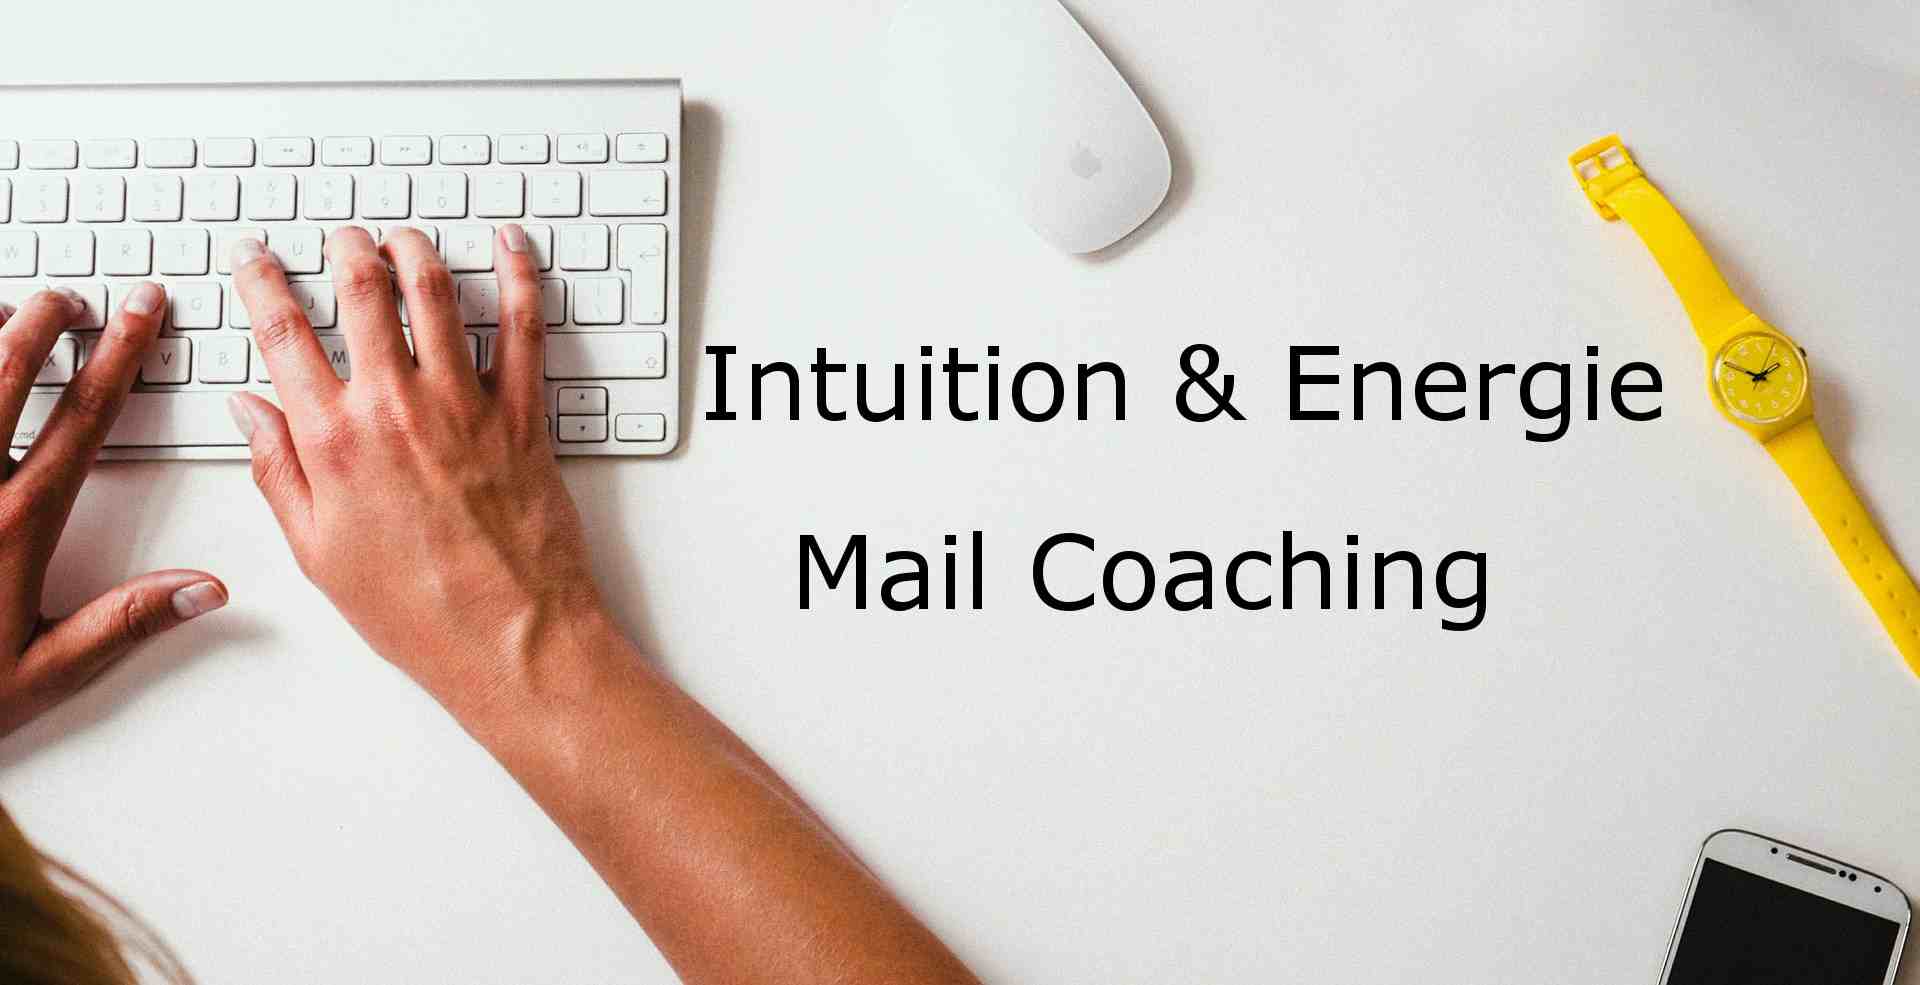 Intuition & Energie Mail Coaching